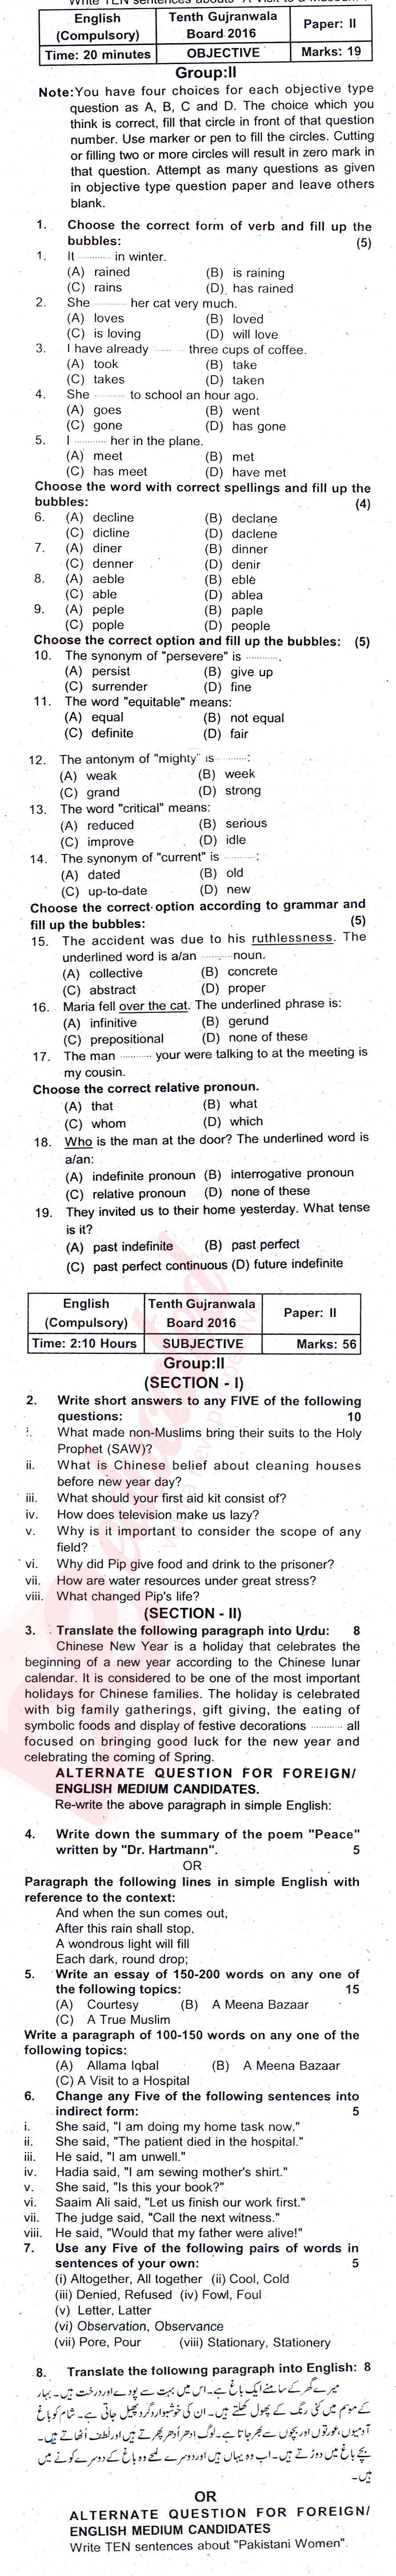 English 10th class Past Paper Group 2 BISE Gujranwala 2016